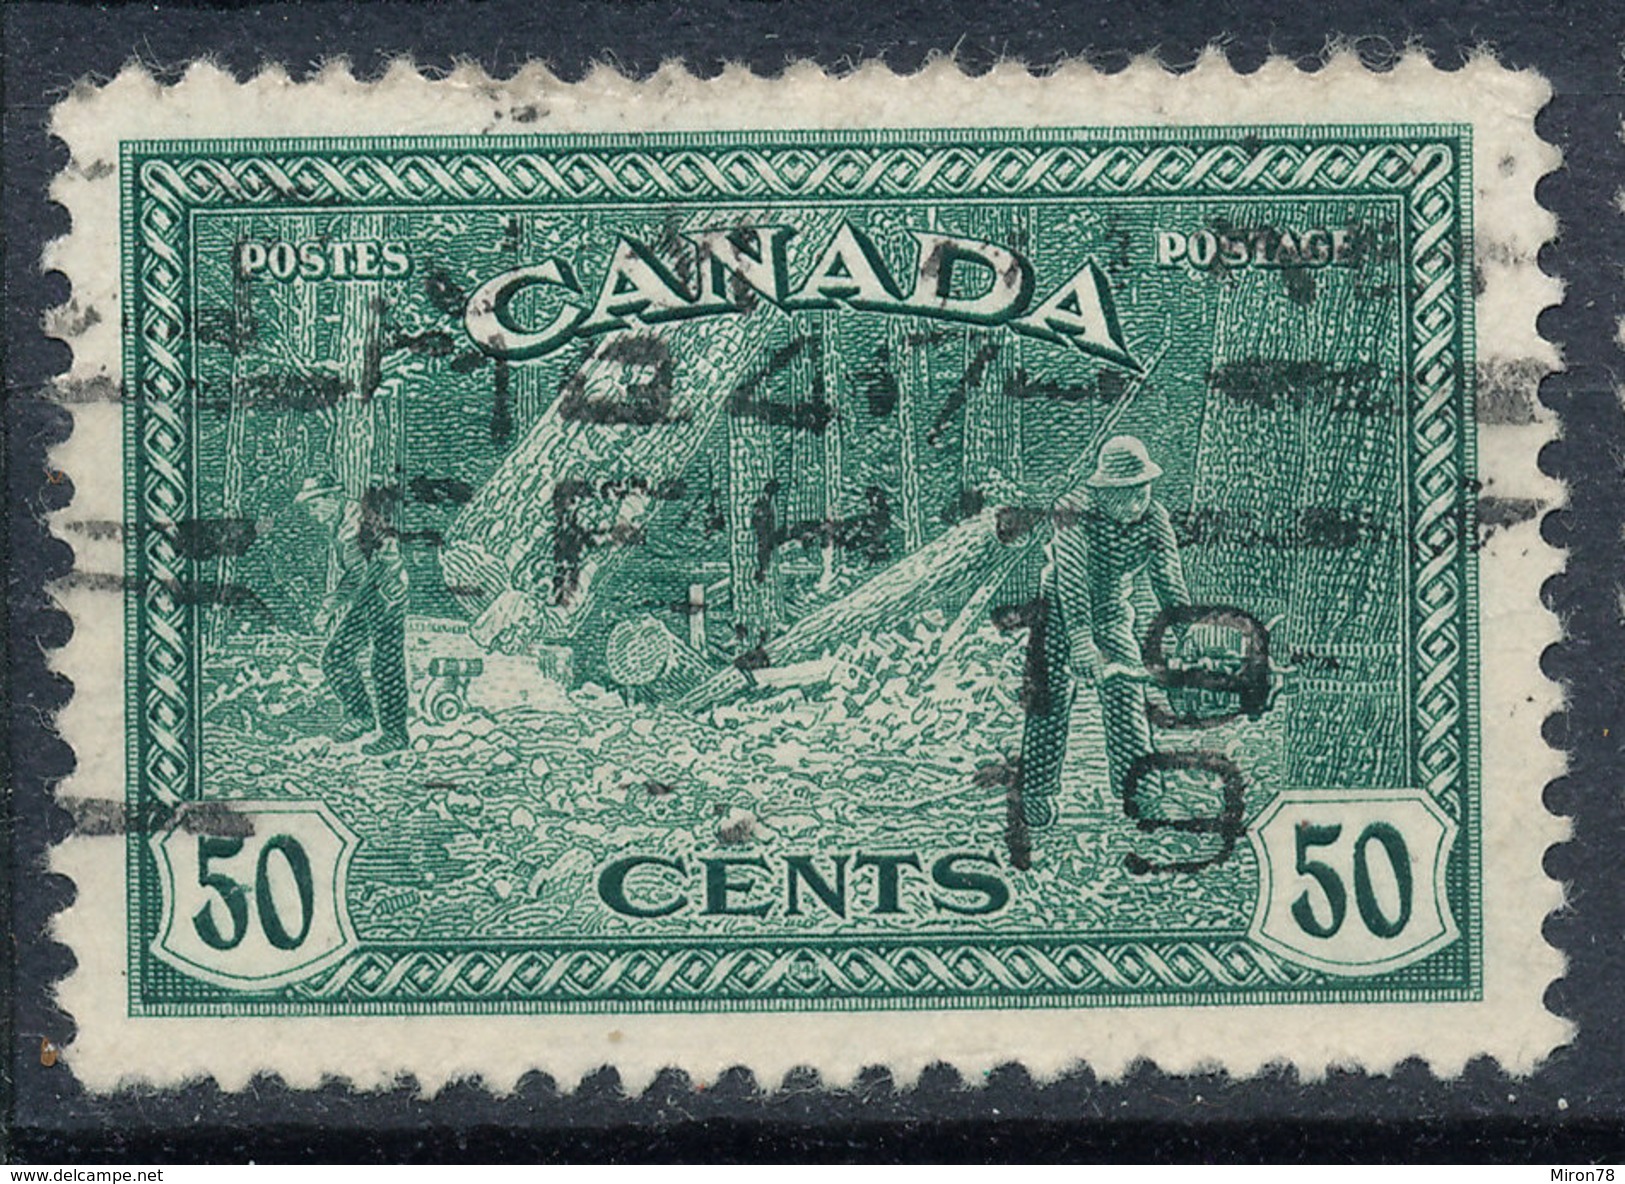 Stamp Canada  1946 50c Used - Used Stamps